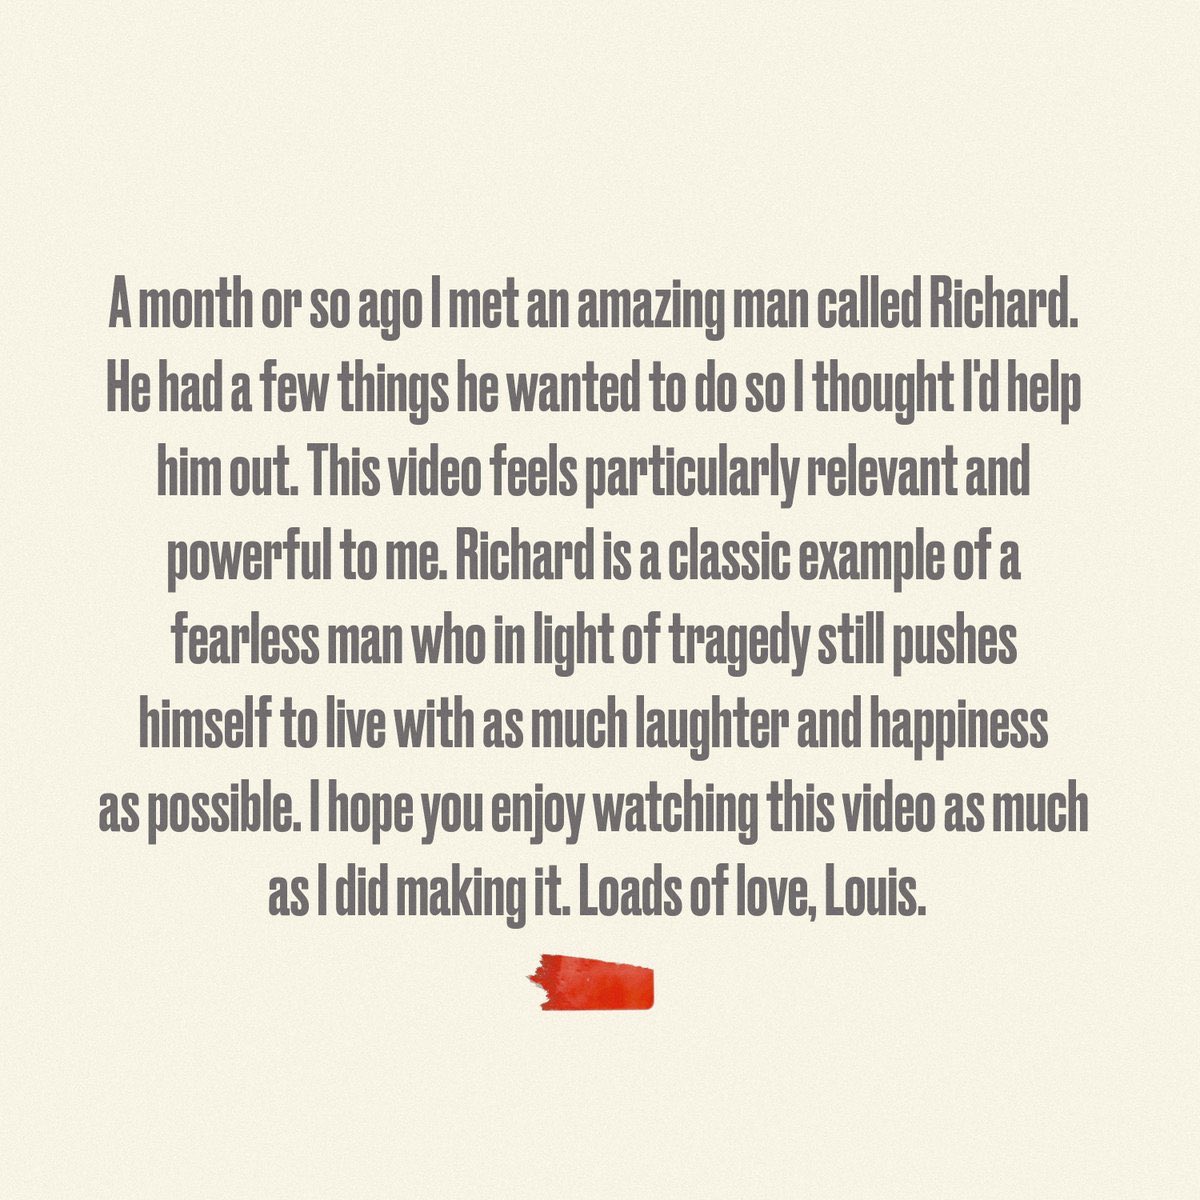 last year louis tomlinson has helped 83-year-old Richard fulfill his bucket list and he posted a video about the experience they had together on his official youtube channel